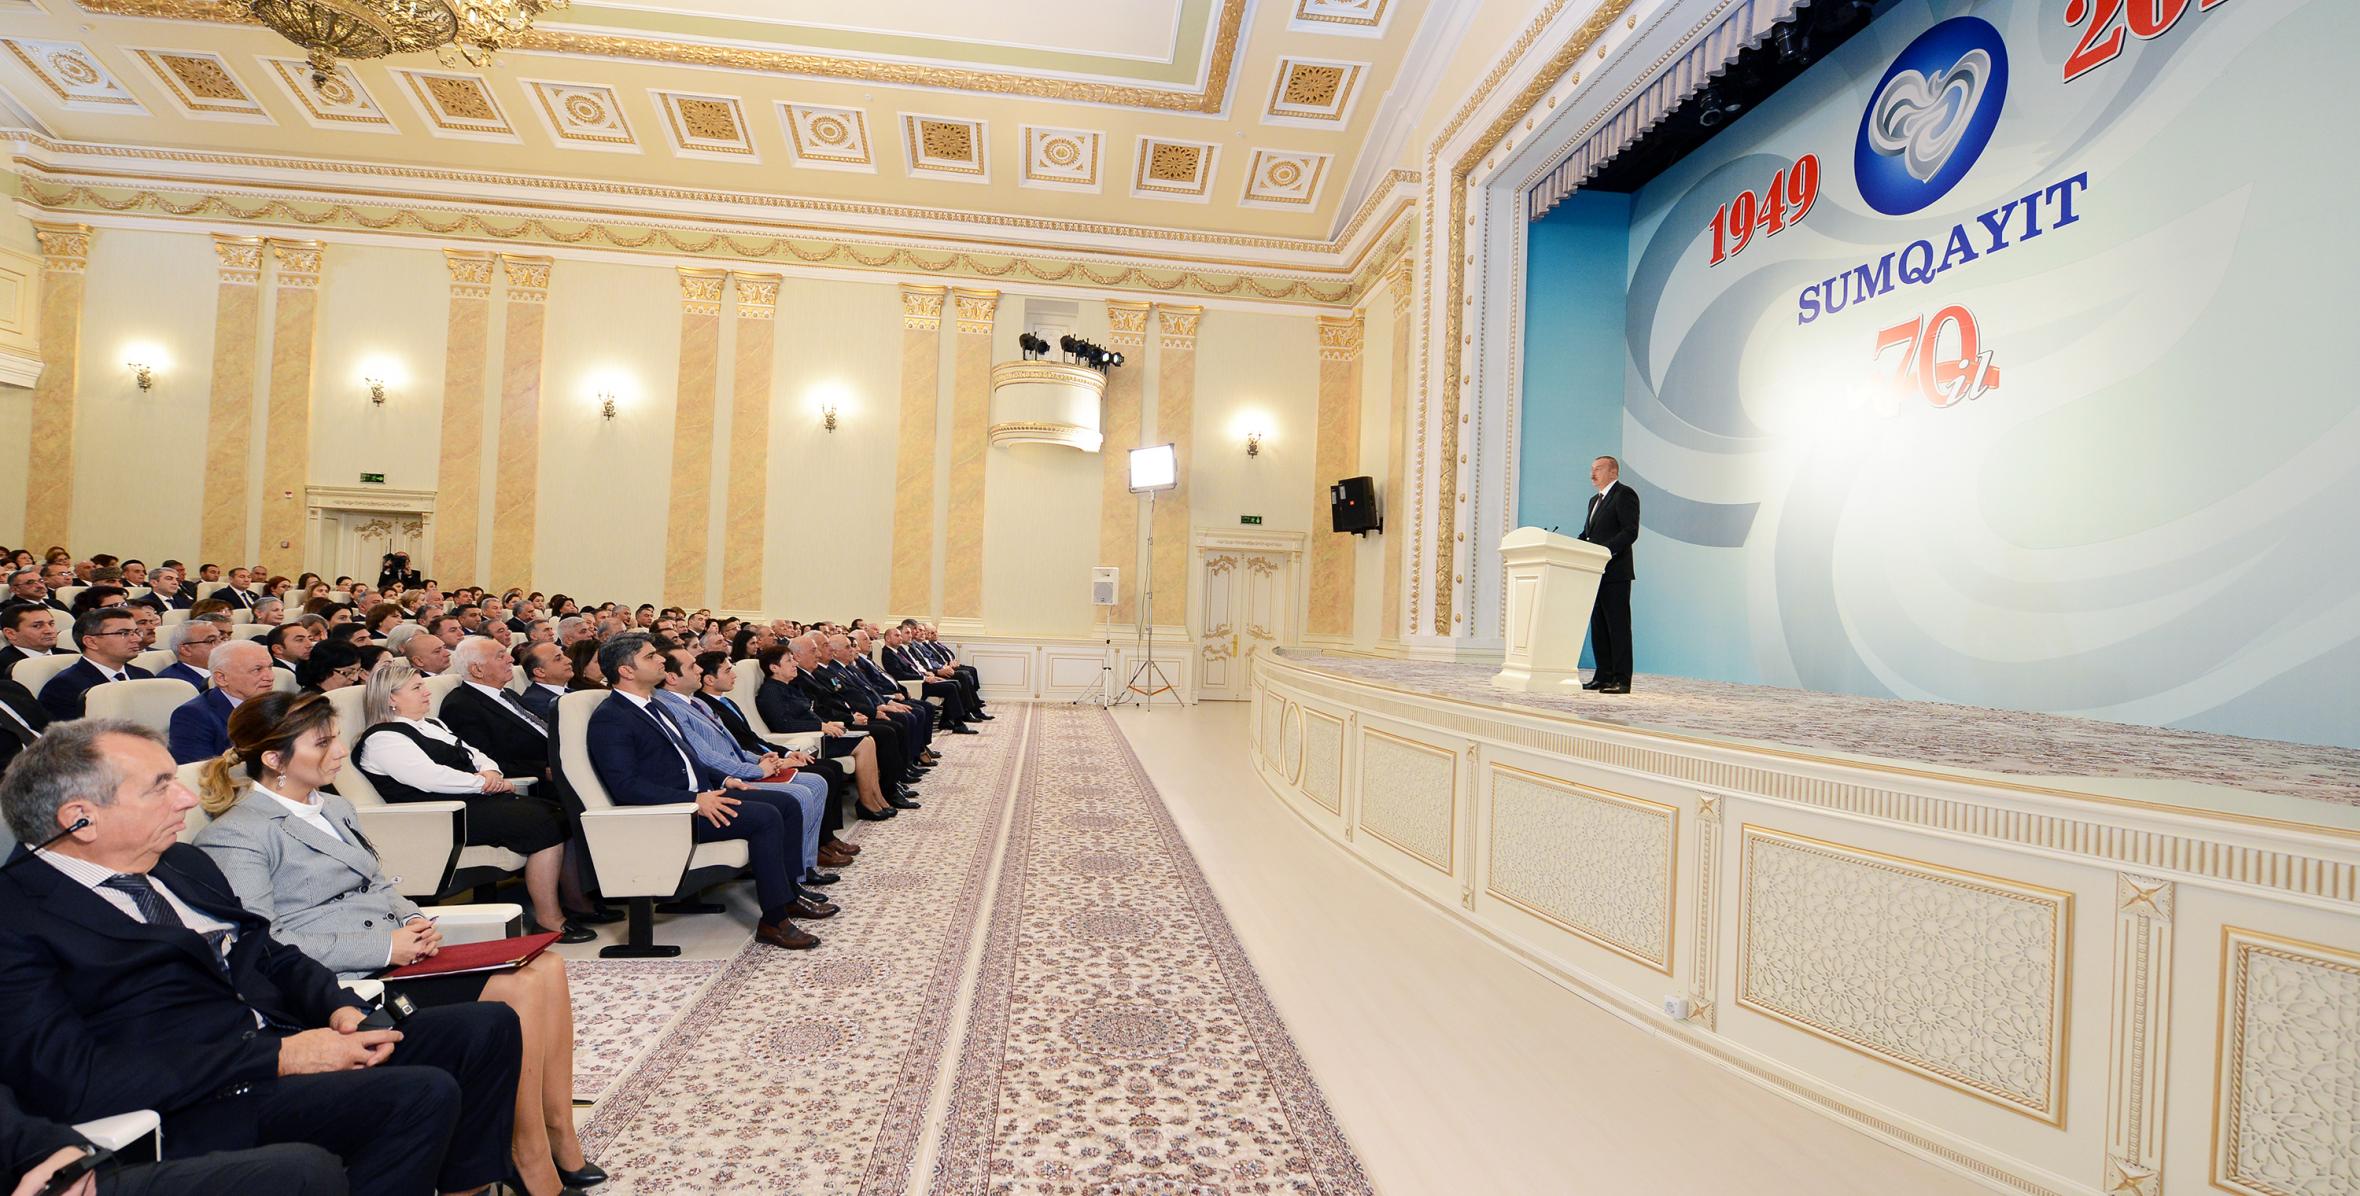 Ilham Aliyev attended event marking 70th anniversary of Sumgayit